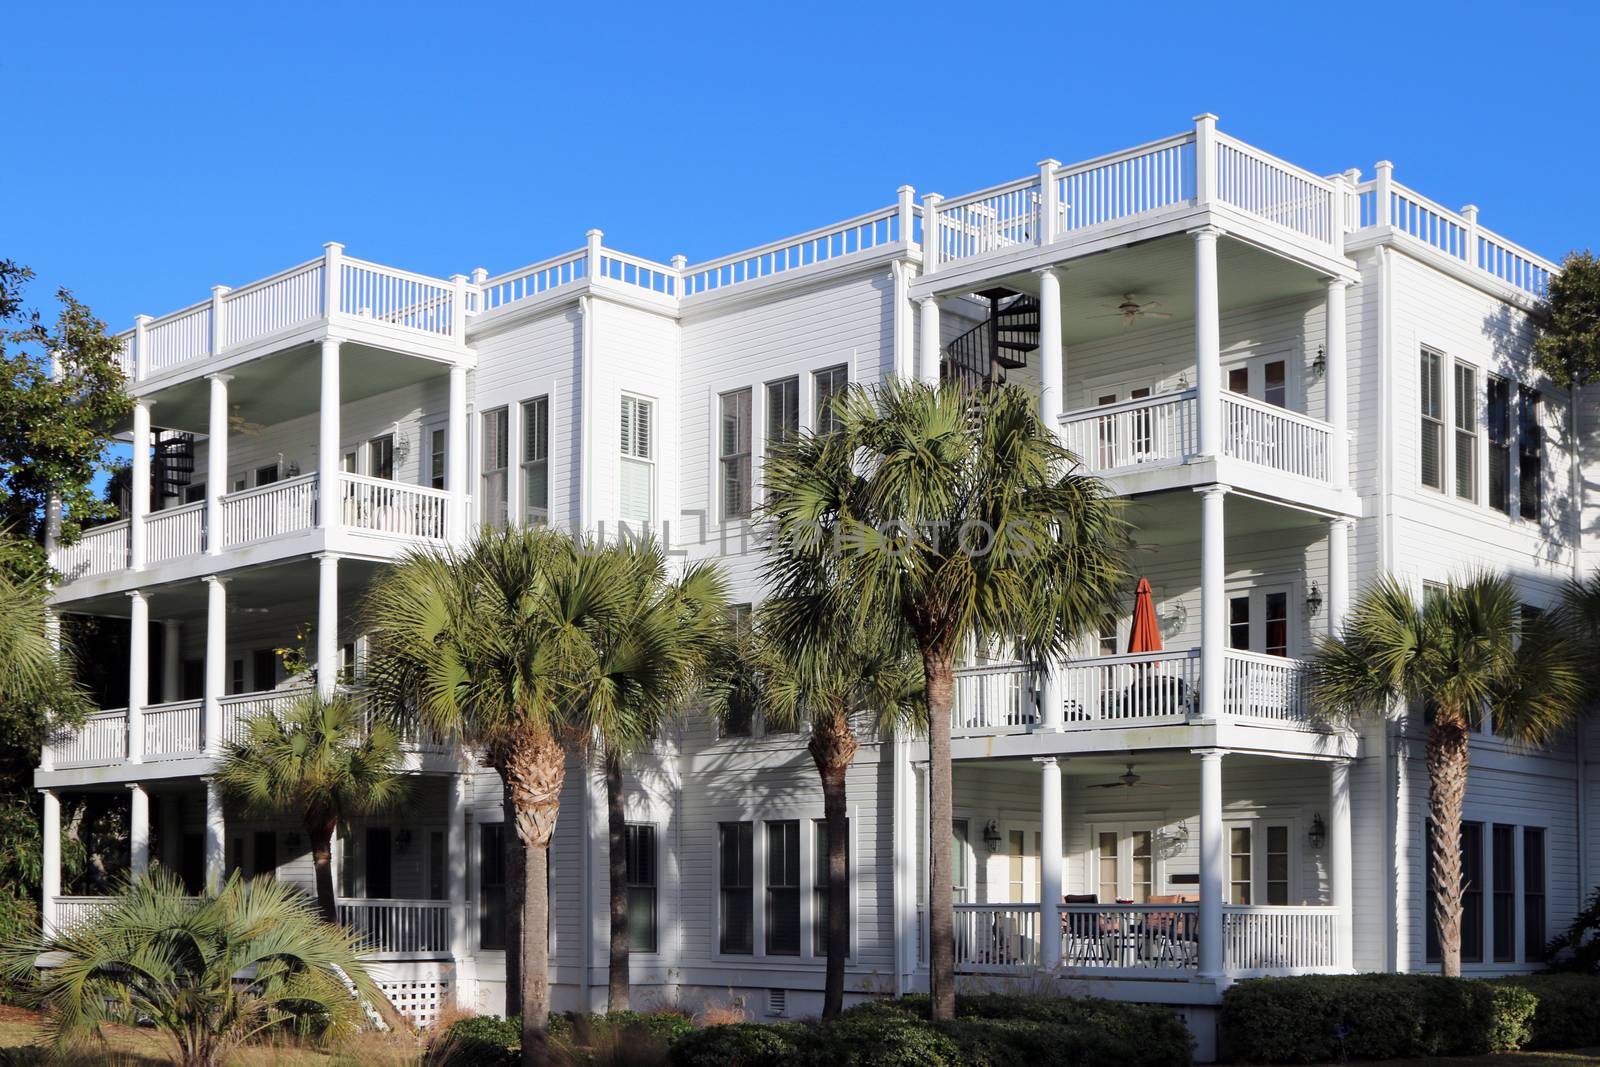 Classical southern architecture on these condominiums.